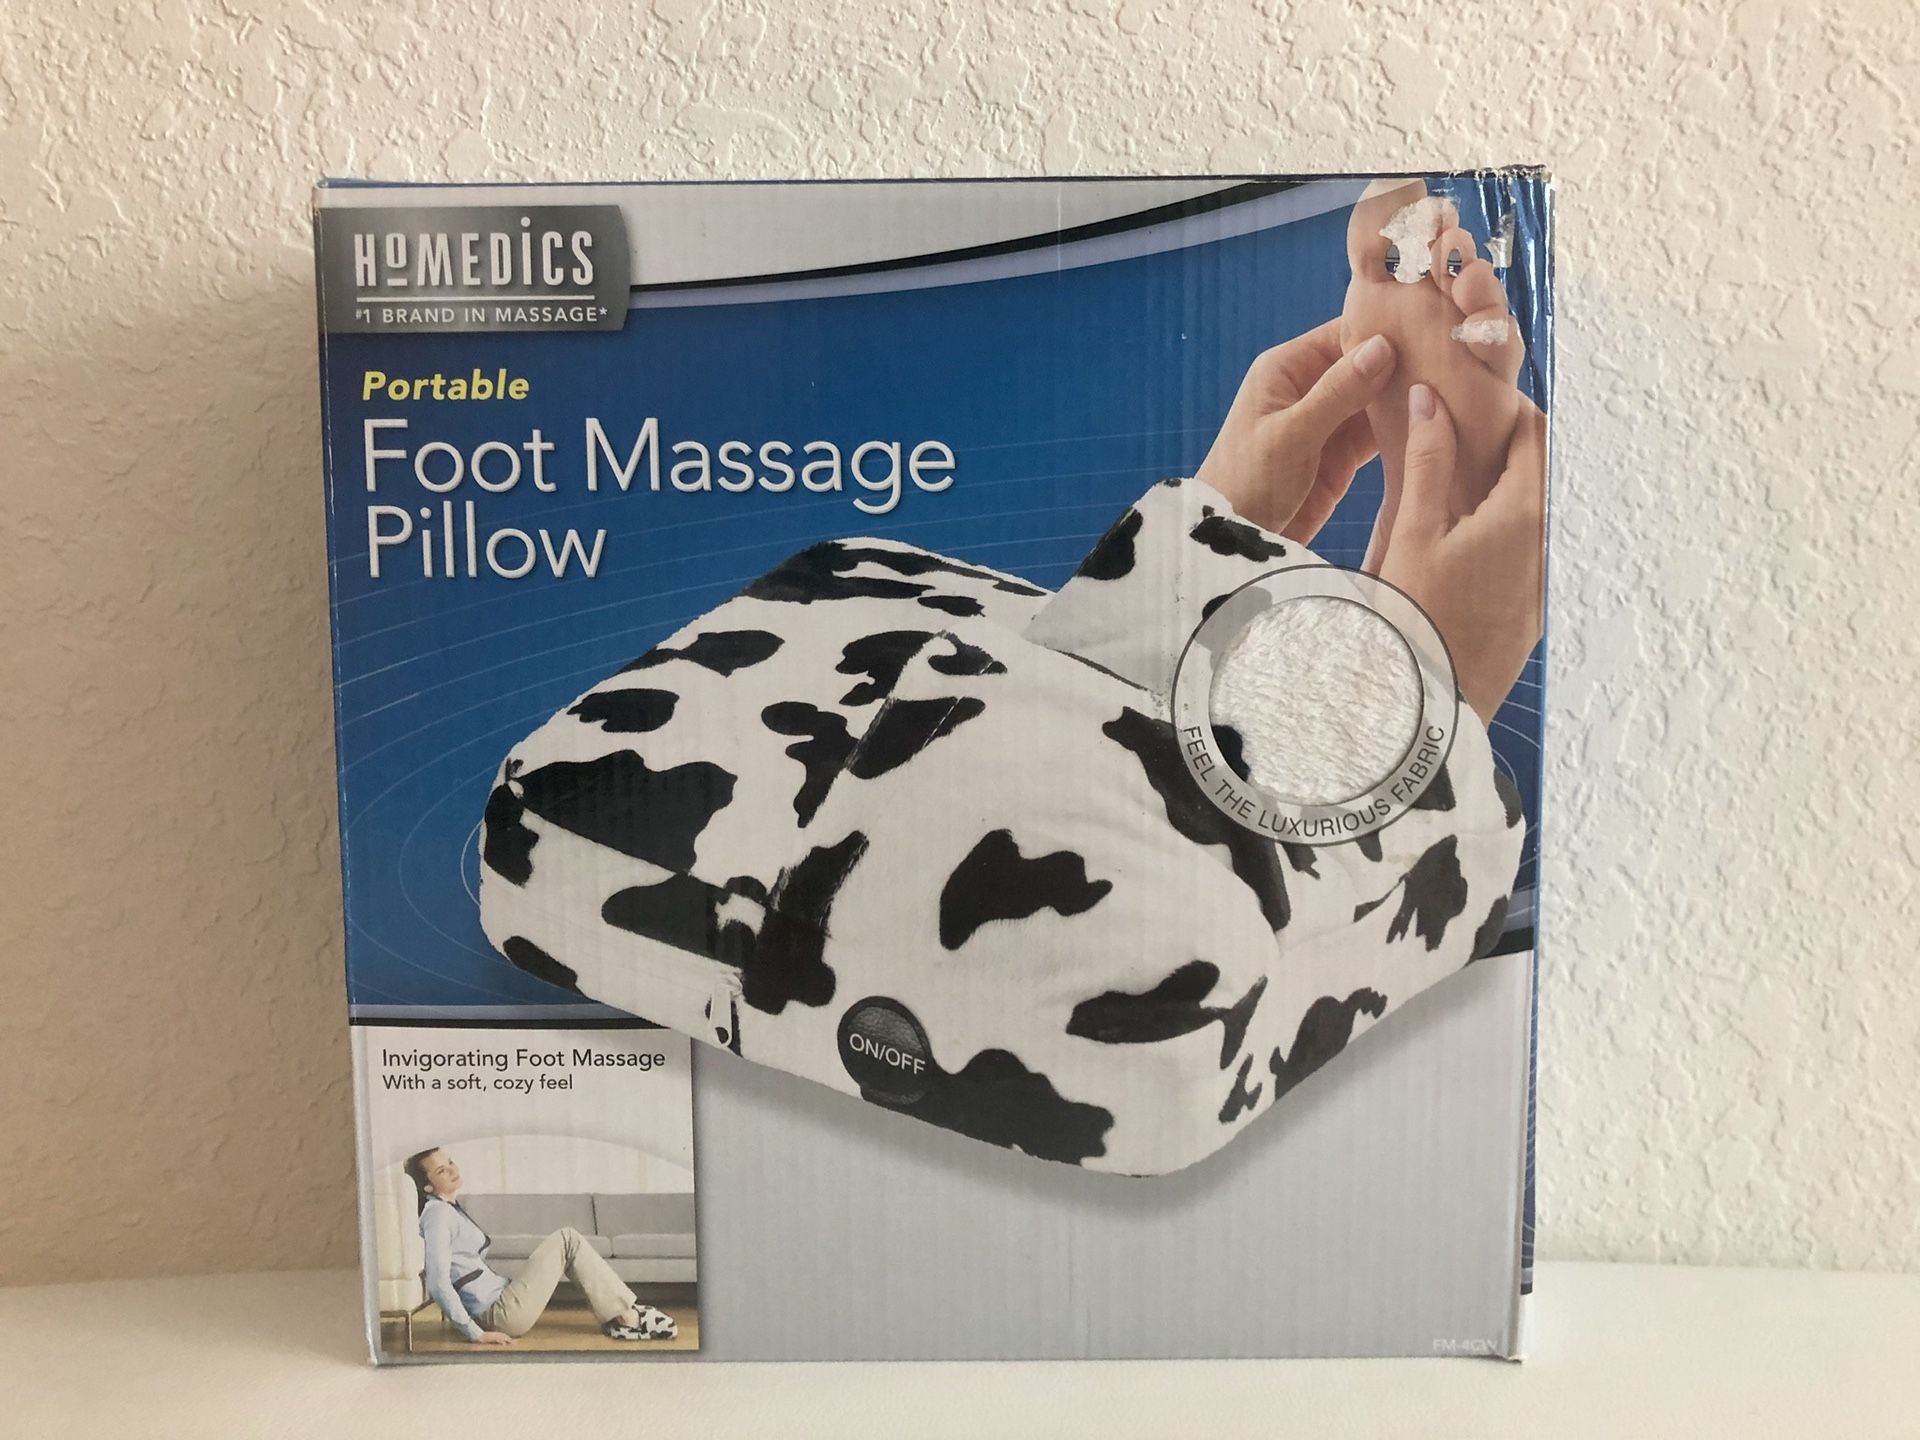 Homedics Portable Foot Massage Pillow Cow Print Black and White